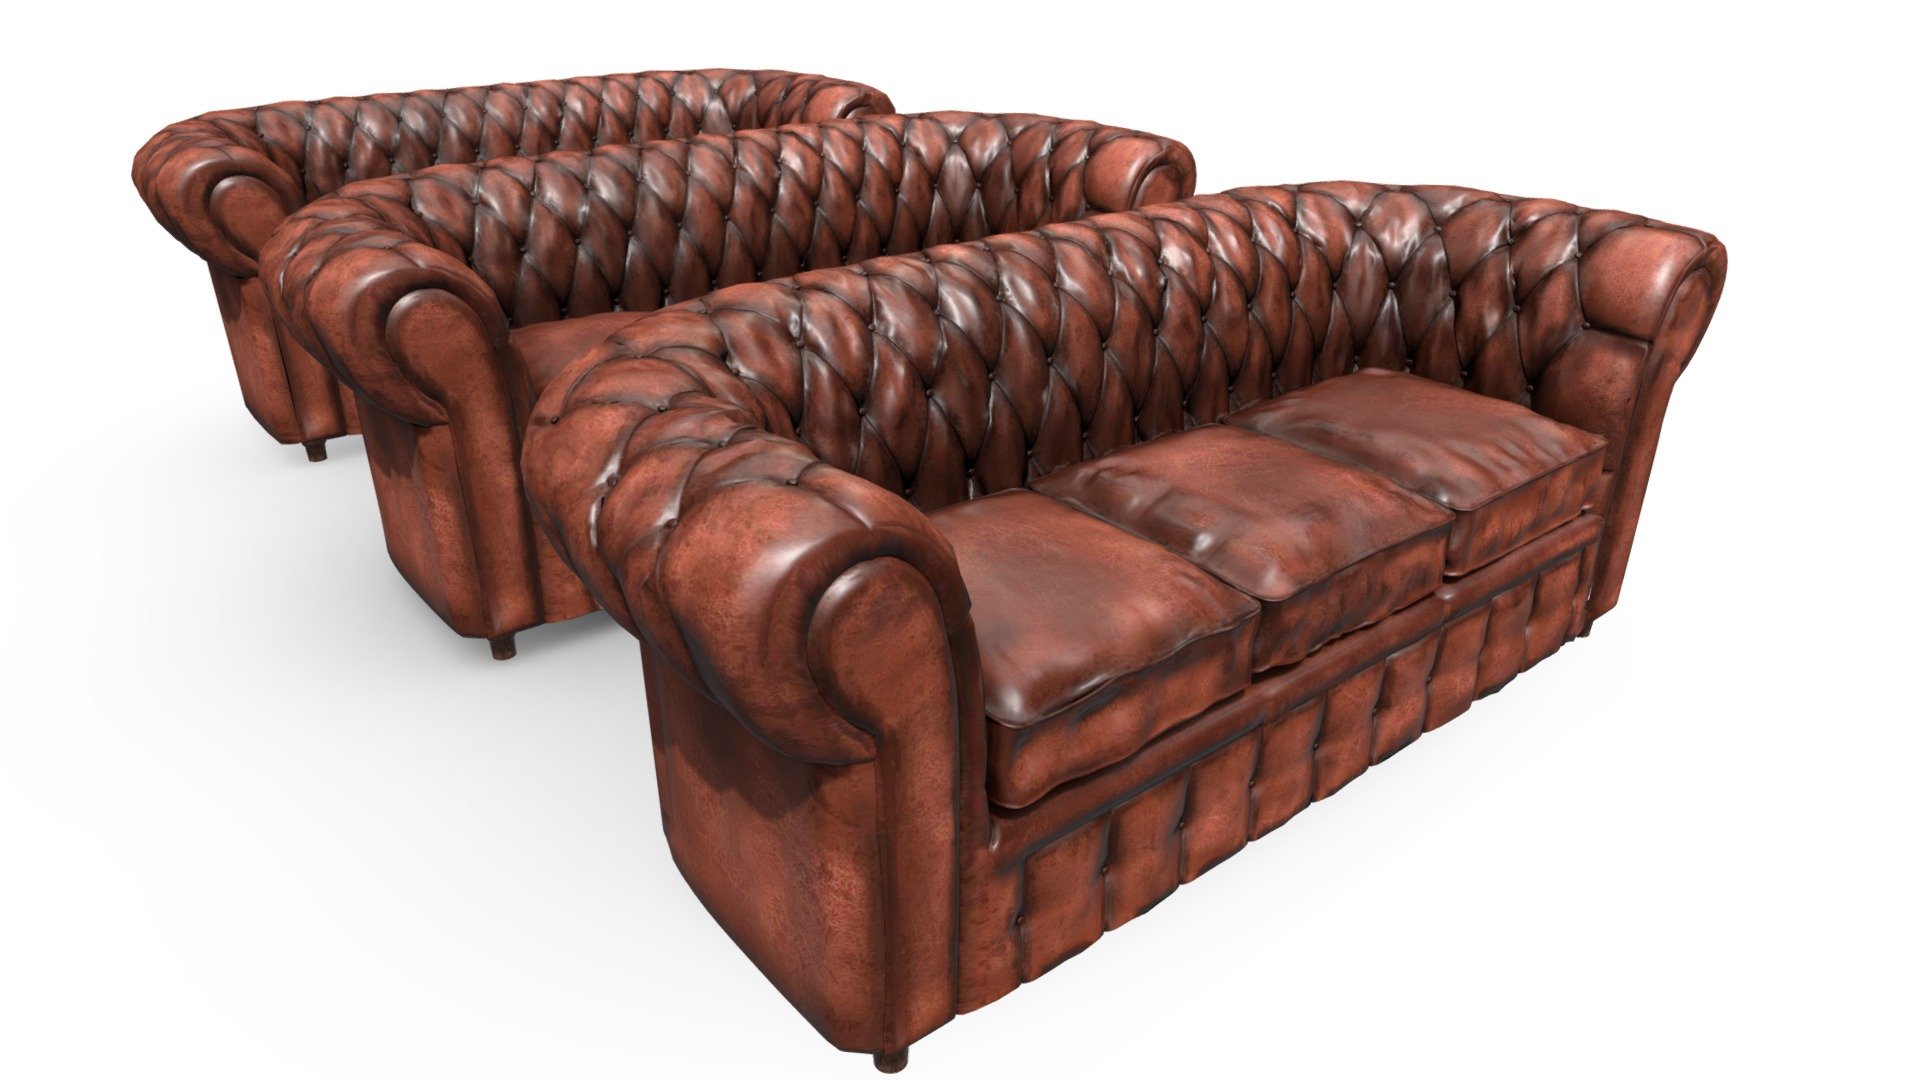 3 seat sofa Chesterfield
Contents 3 models: SuperHigh Poly (88K), High Poly (27K) and Low Poly (8K) - Sofa Chesterfield (SHP, HP and LP) - Buy Royalty Free 3D model by jonathanborges3d 3d model